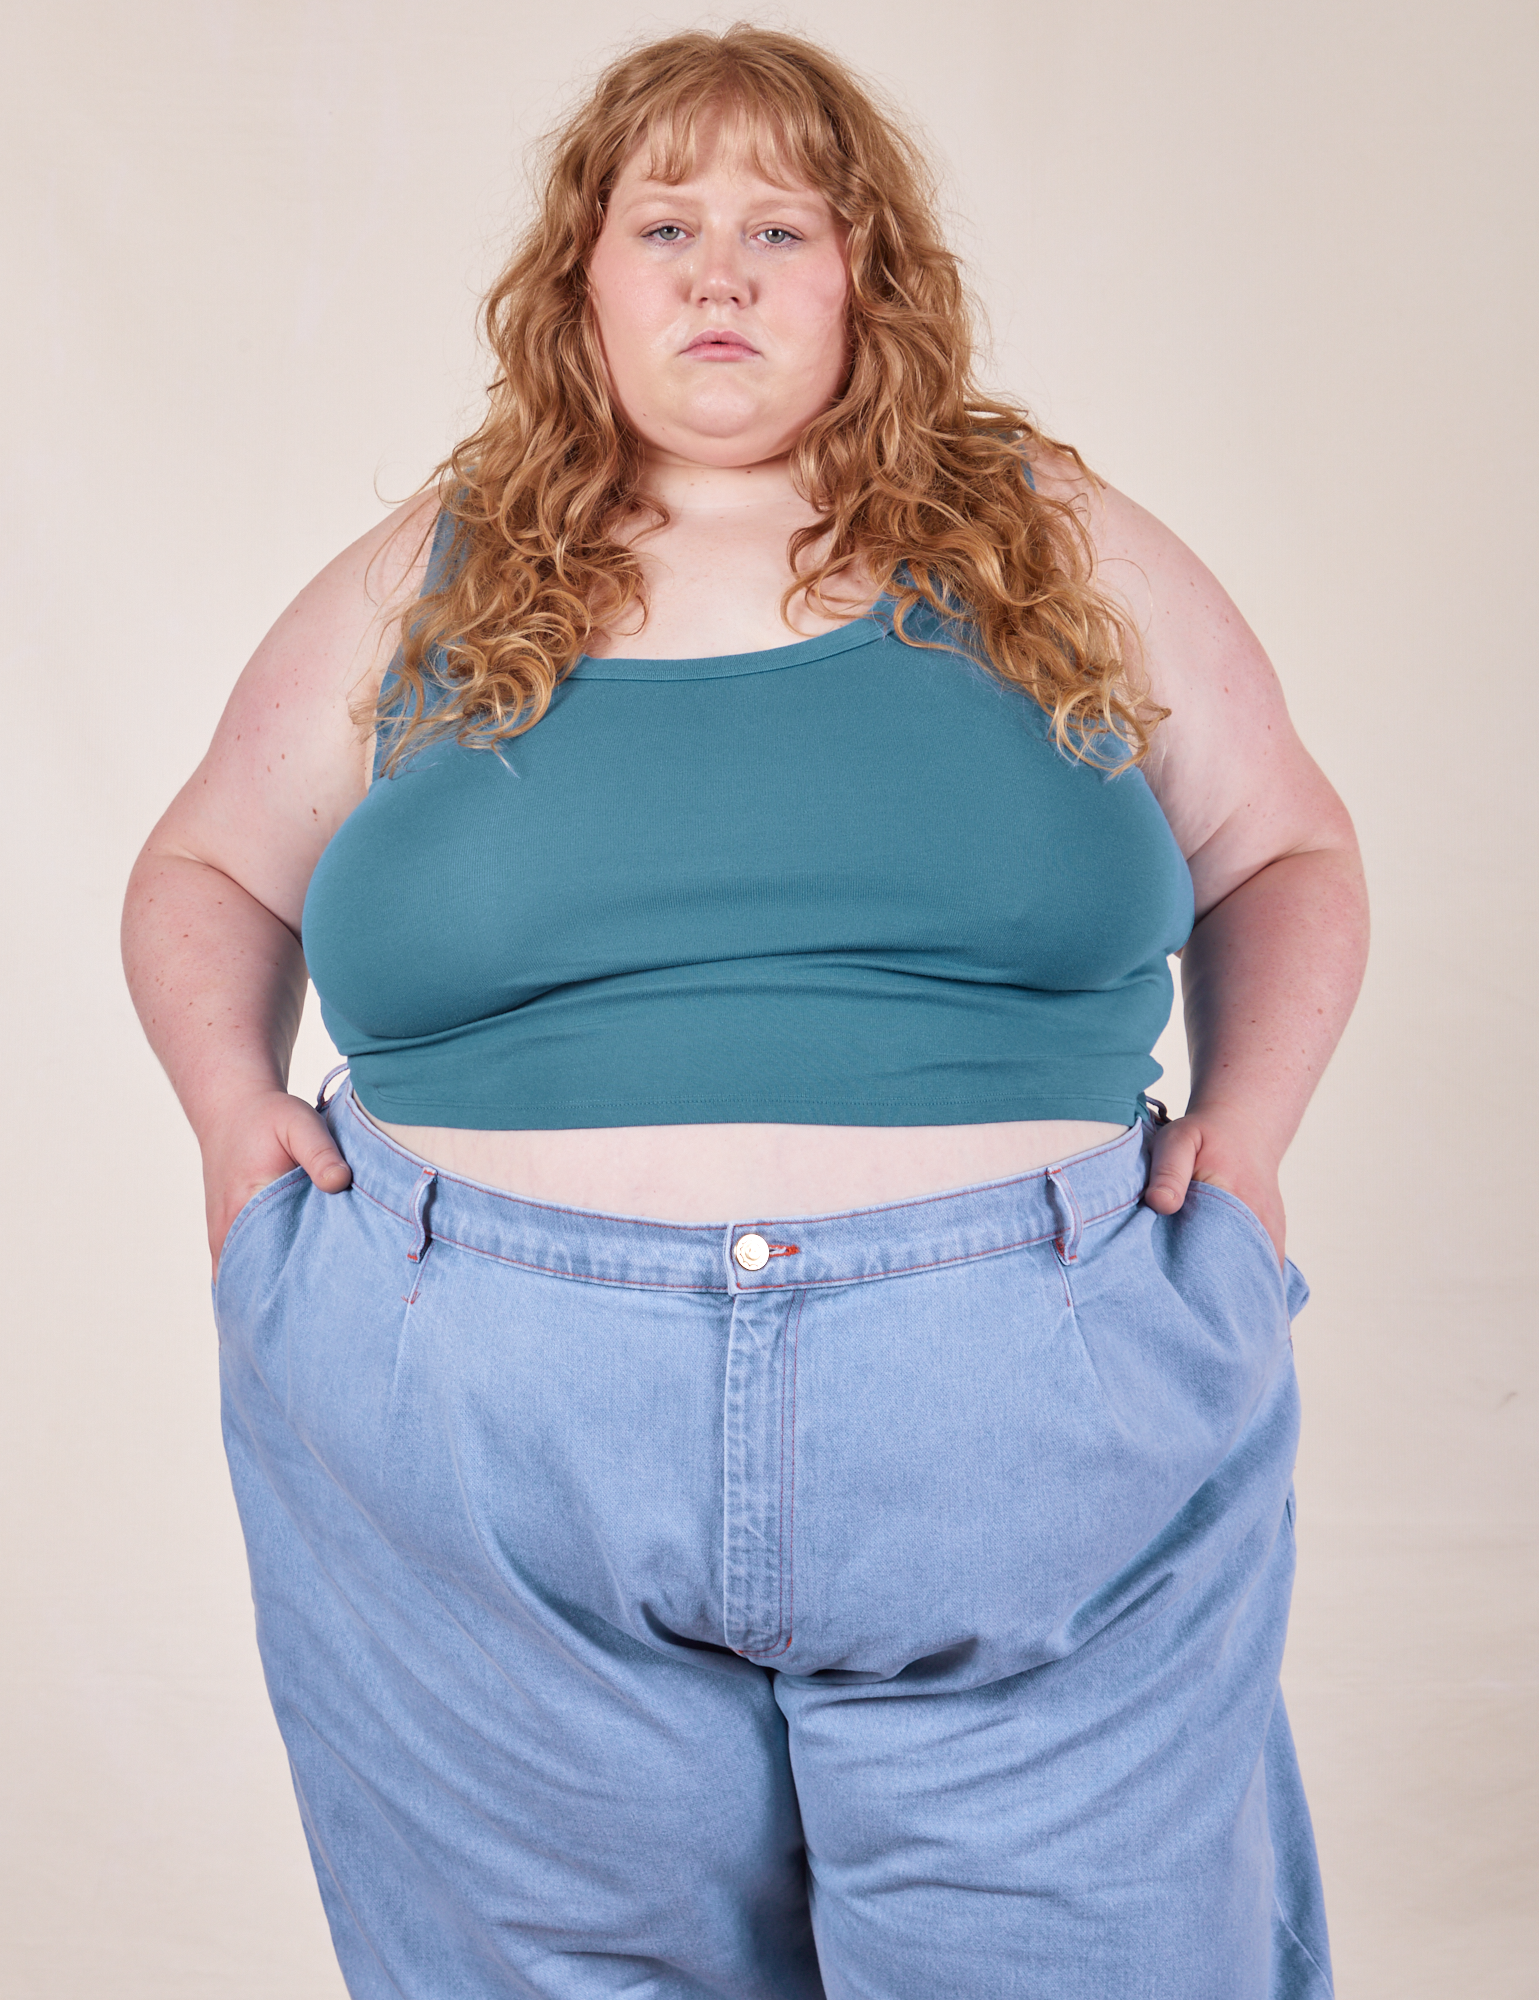 Catie is 5'11" and wearing 4XL Cropped Tank Top in Marine Blue